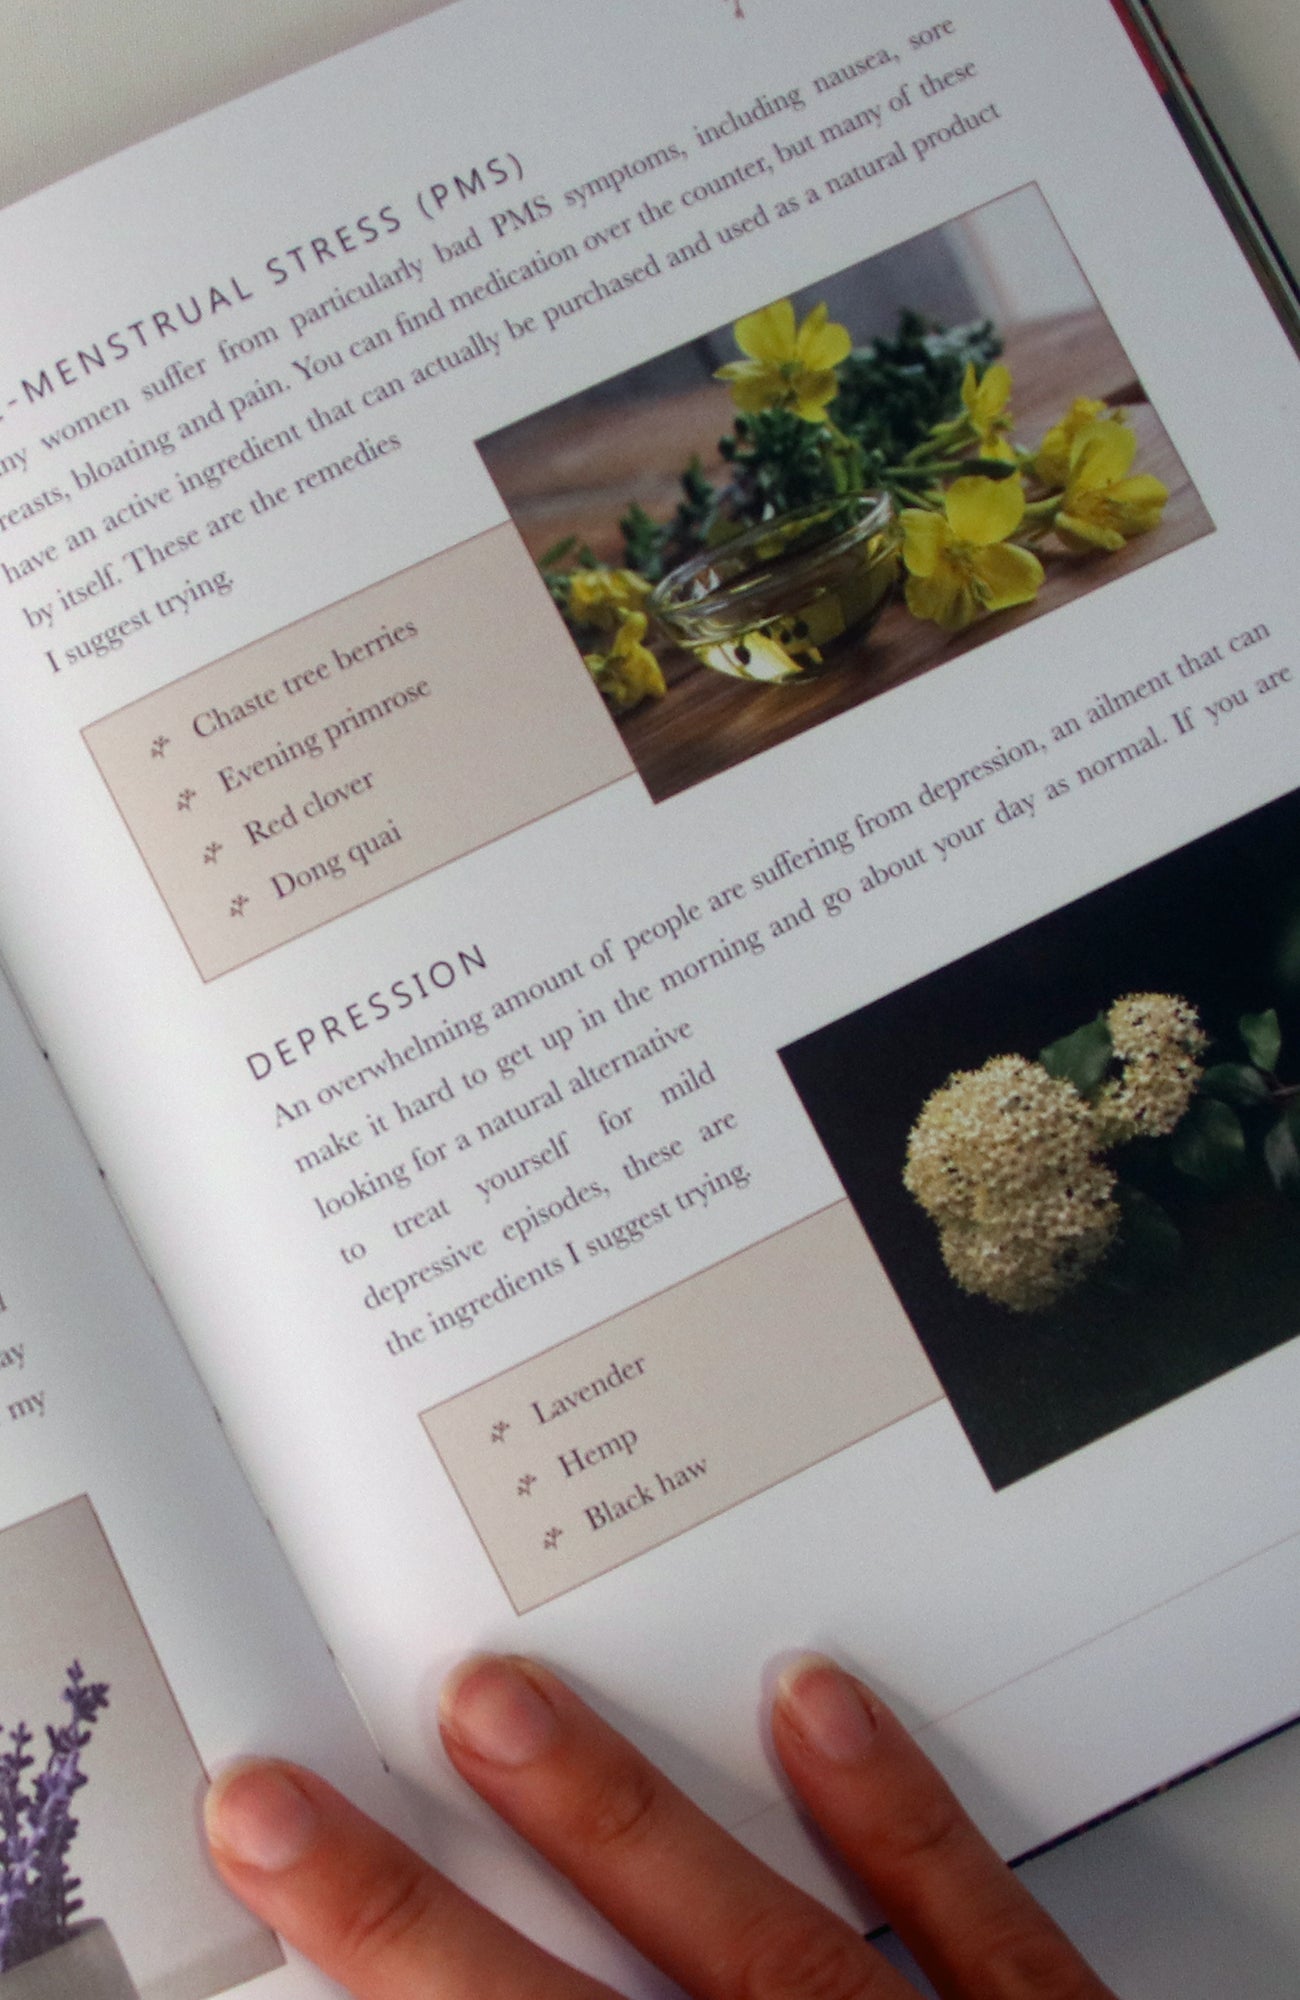 From Earth: A guide to creating a natural apothecary